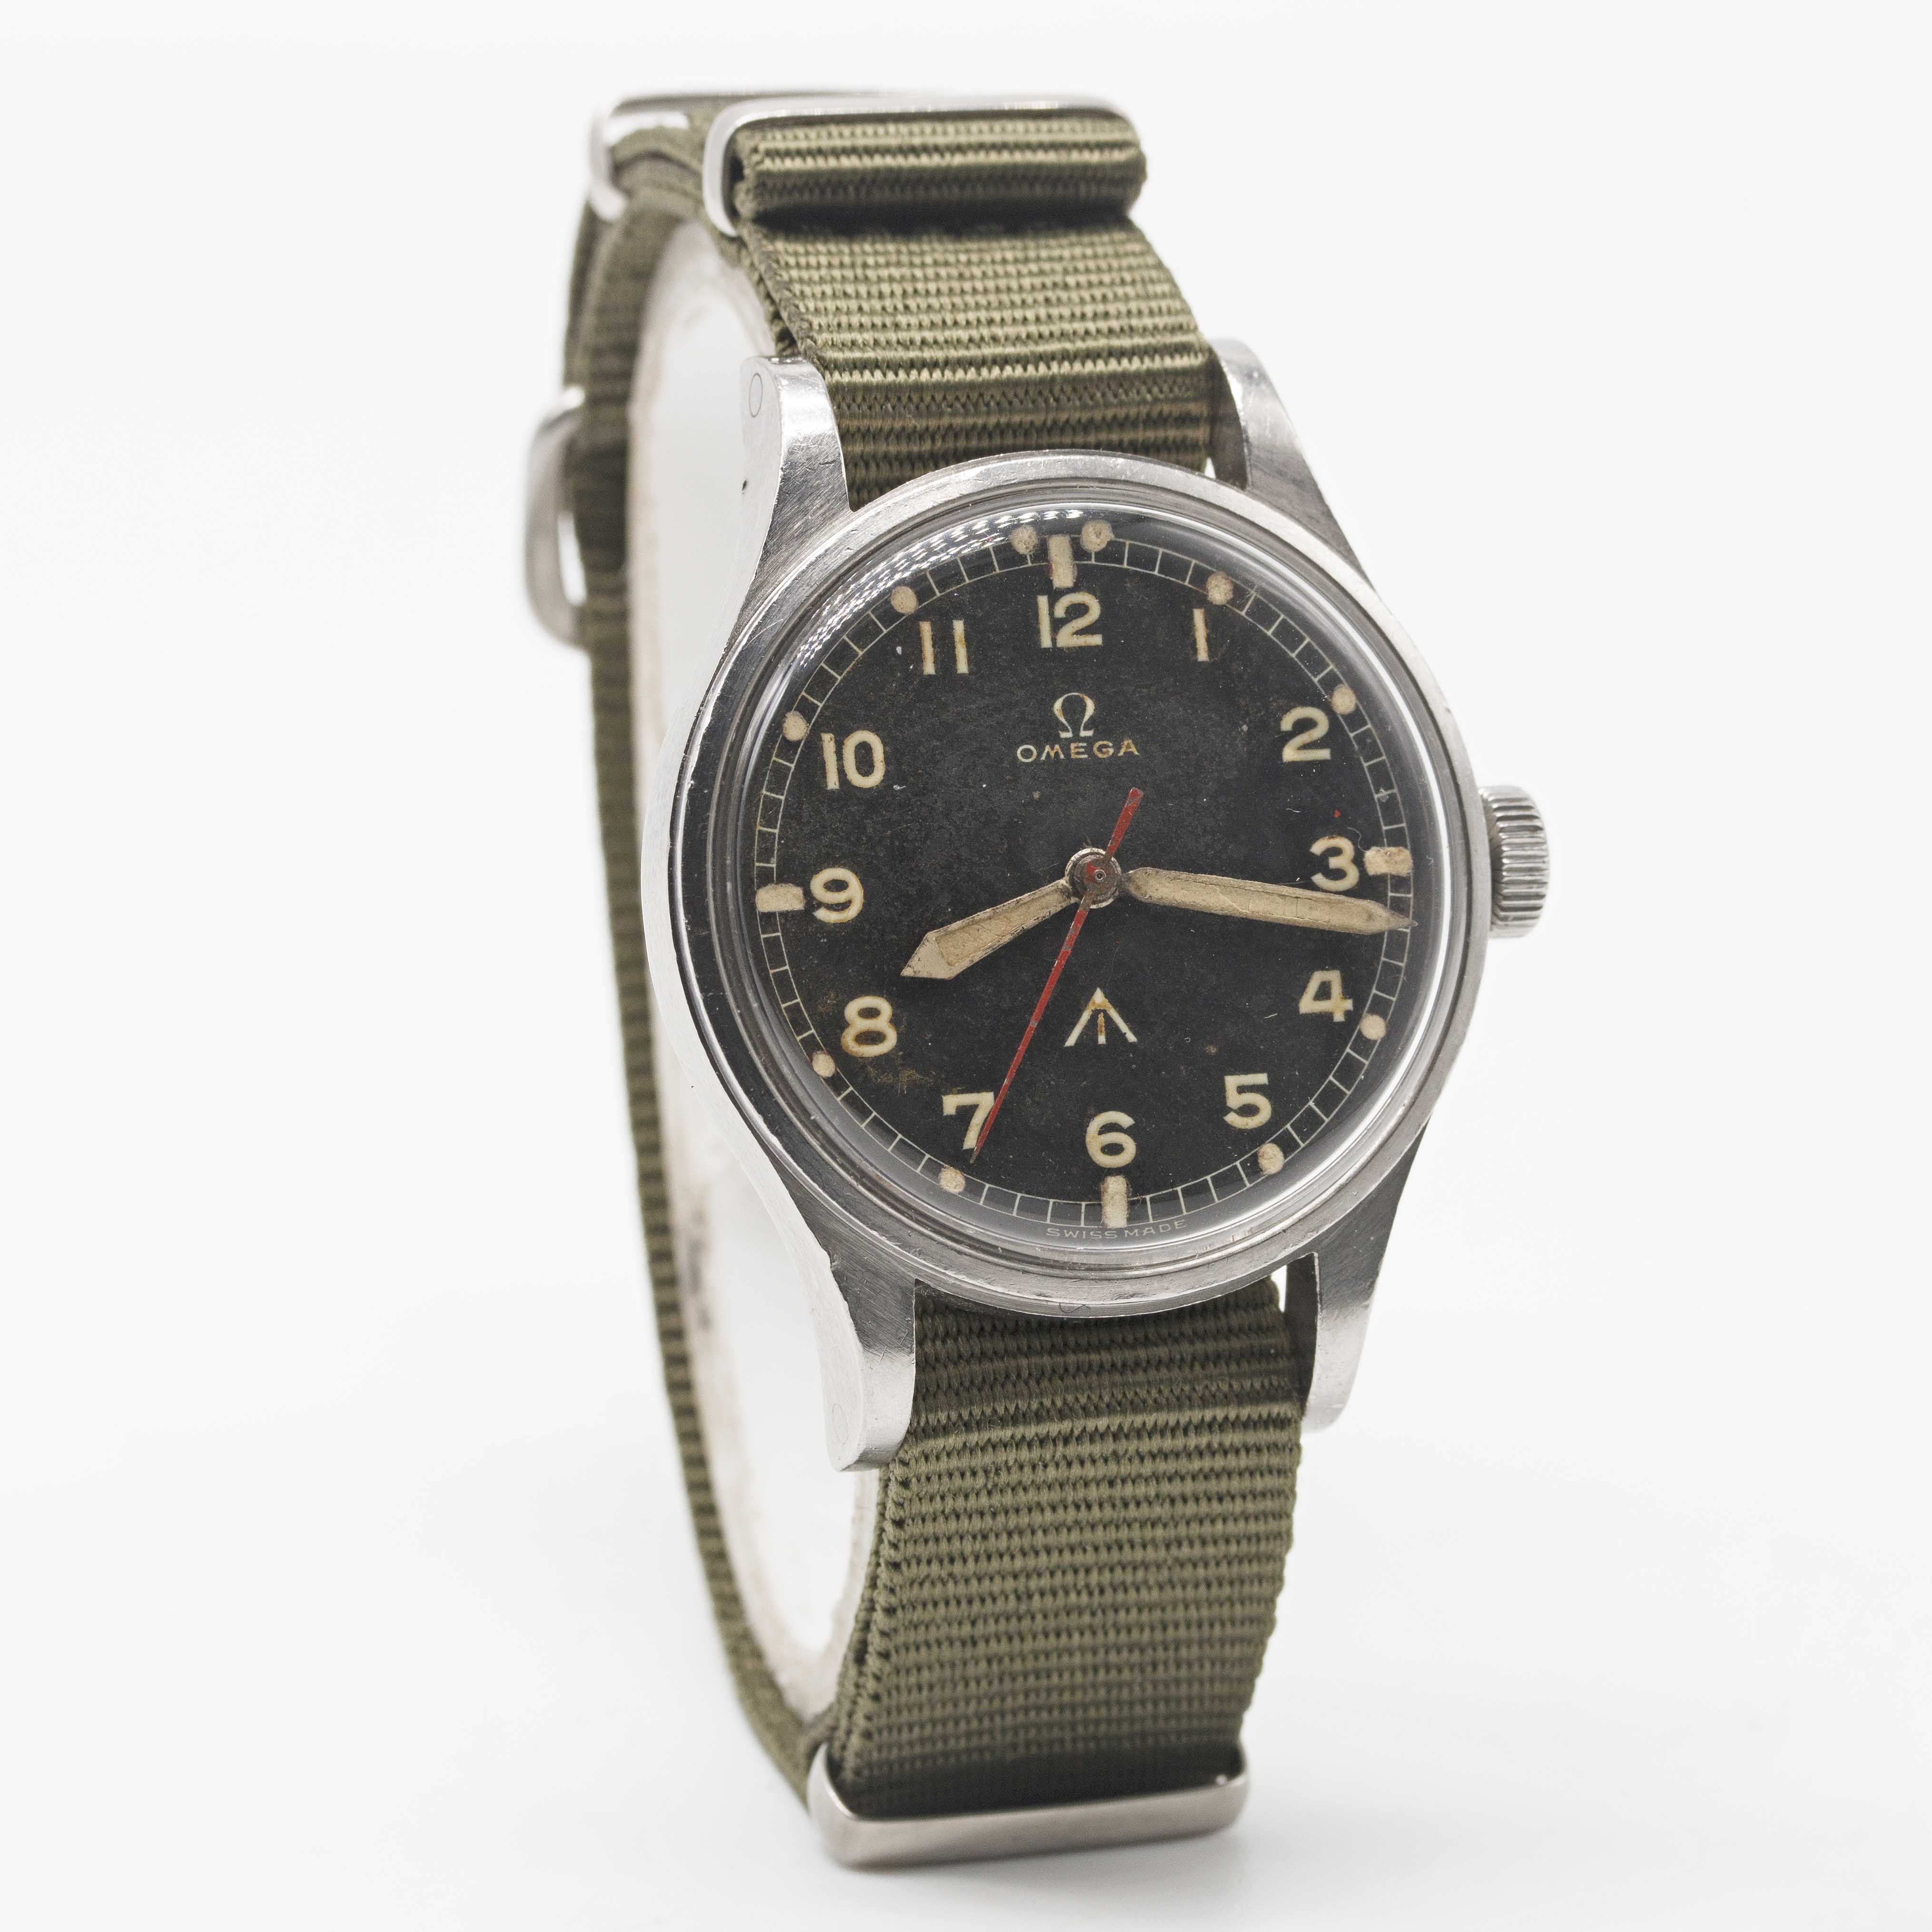 A GENTLEMAN'S STAINLESS STEEL ROYAL RHODESIAN AIR FORCE MILITARY OMEGA PILOTS WRIST WATCH CIRCA - Image 4 of 6